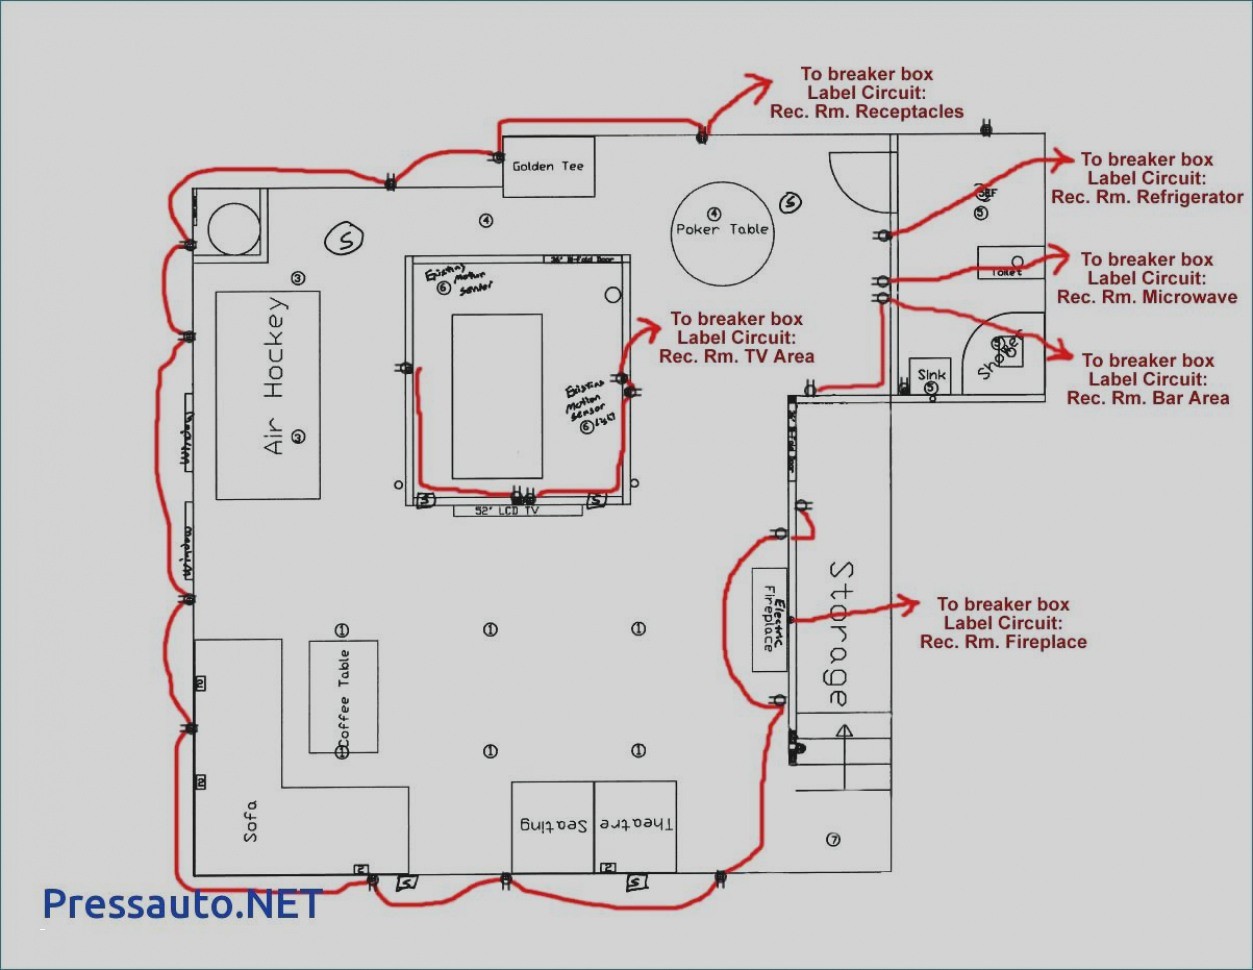 House Wiring Design software Free Download Unique Home Electrical Wiring Diagram Elegant Great Simple Household Wiring